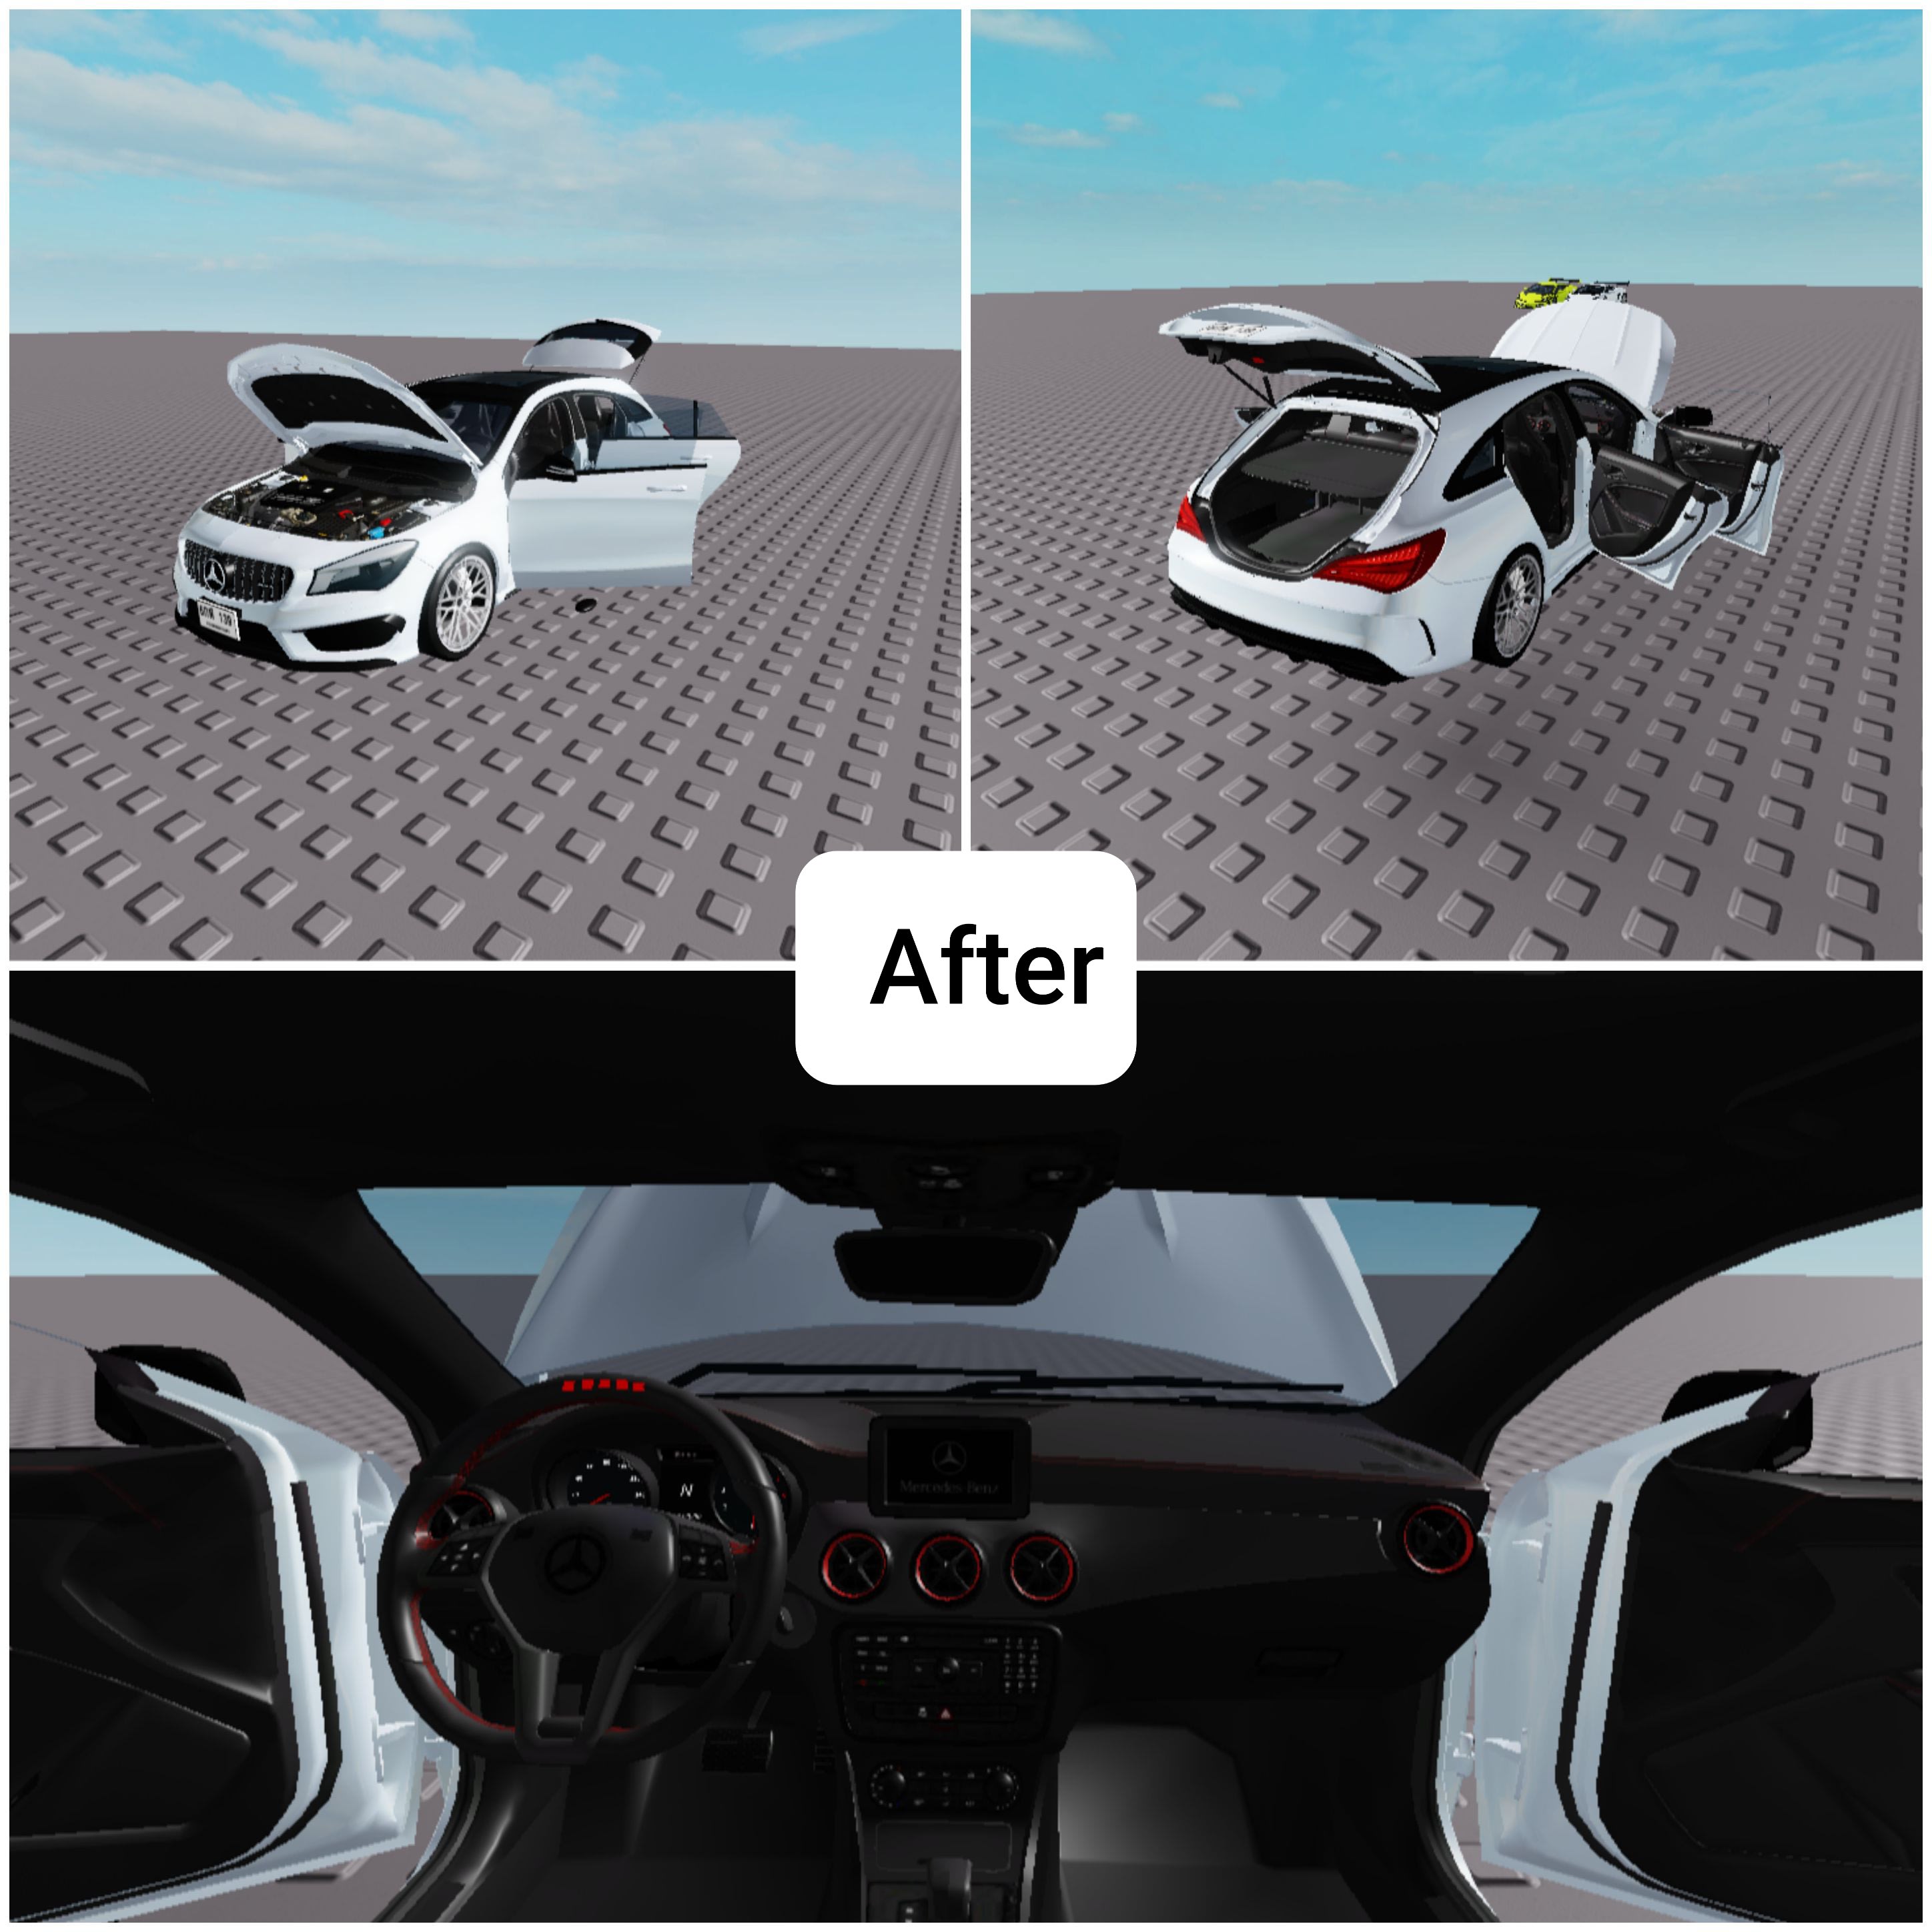 Modify Your Car Model In Roblox Studio With The Specifications You Desire By Sebastian Yeong - pressing e to open a door scripting support roblox